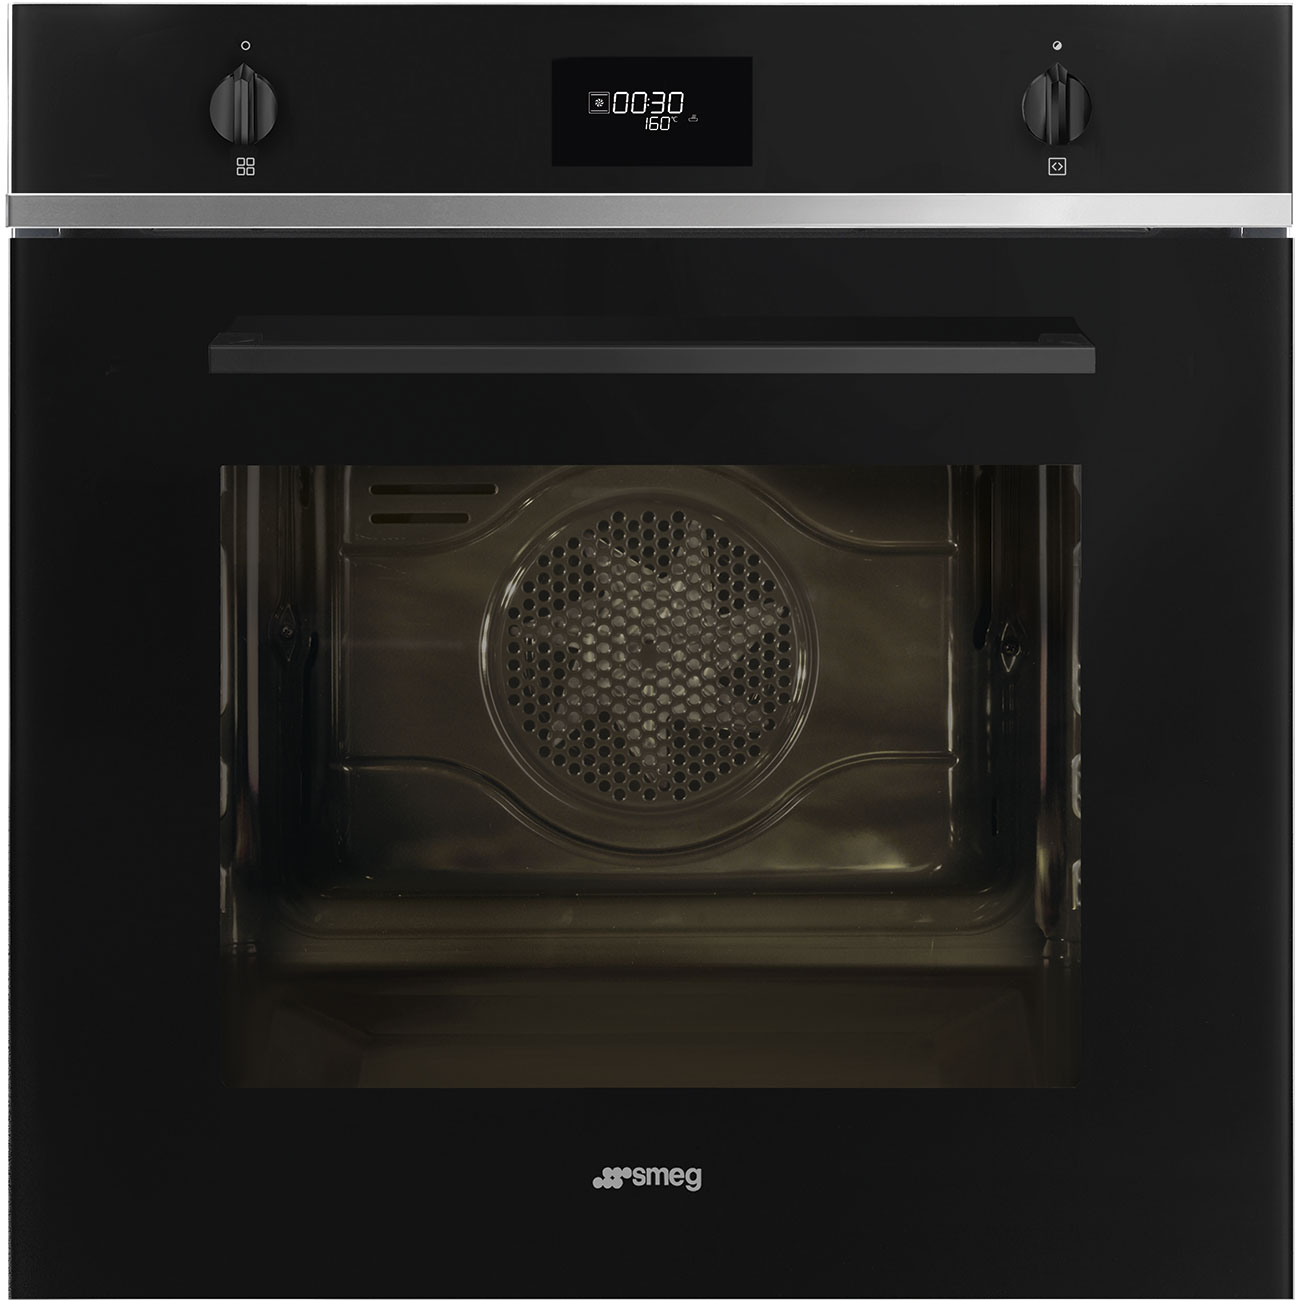 Oven Thermo-ventilated 60cm Smeg_1